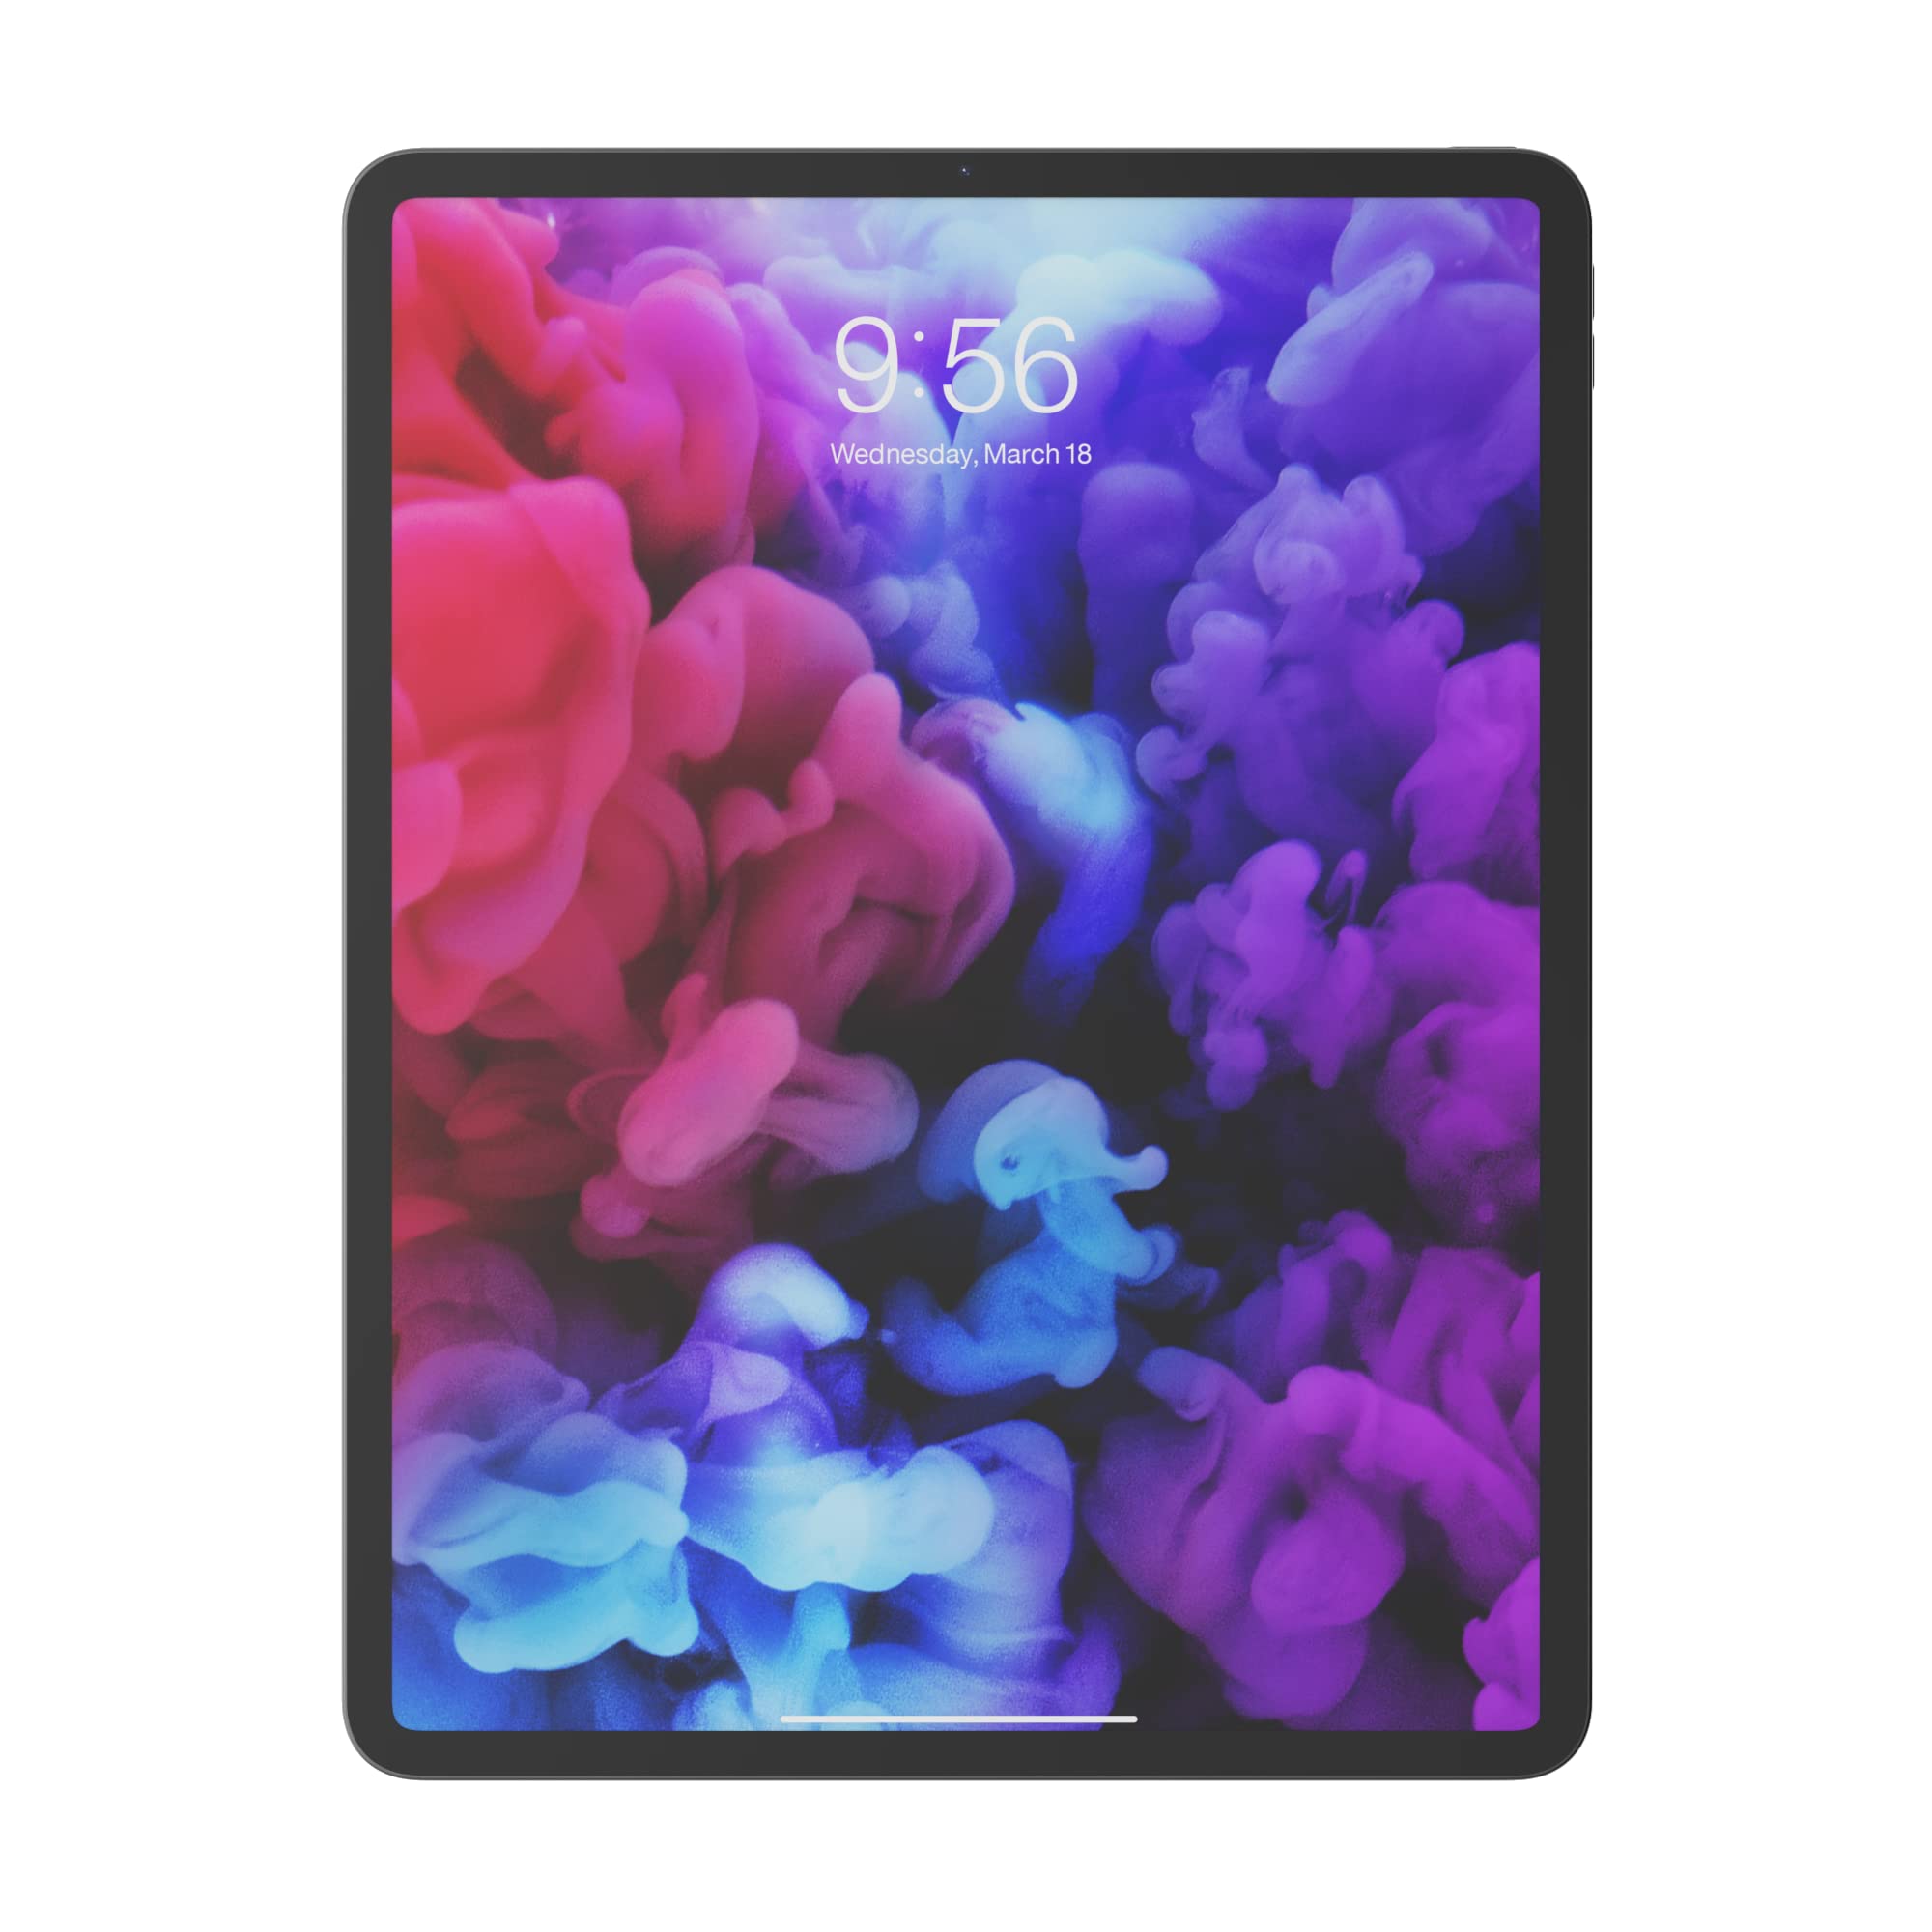 ZAGG InvisibleShield Glass+ VisionGuard Screen Protector for Apple iPad Pro 12.9-inch (3rd & 4th Gen), 3X Shatter Protection, Blue-Light Filtration, Maintains HD Clarity, Anti-Fingerprint Technology